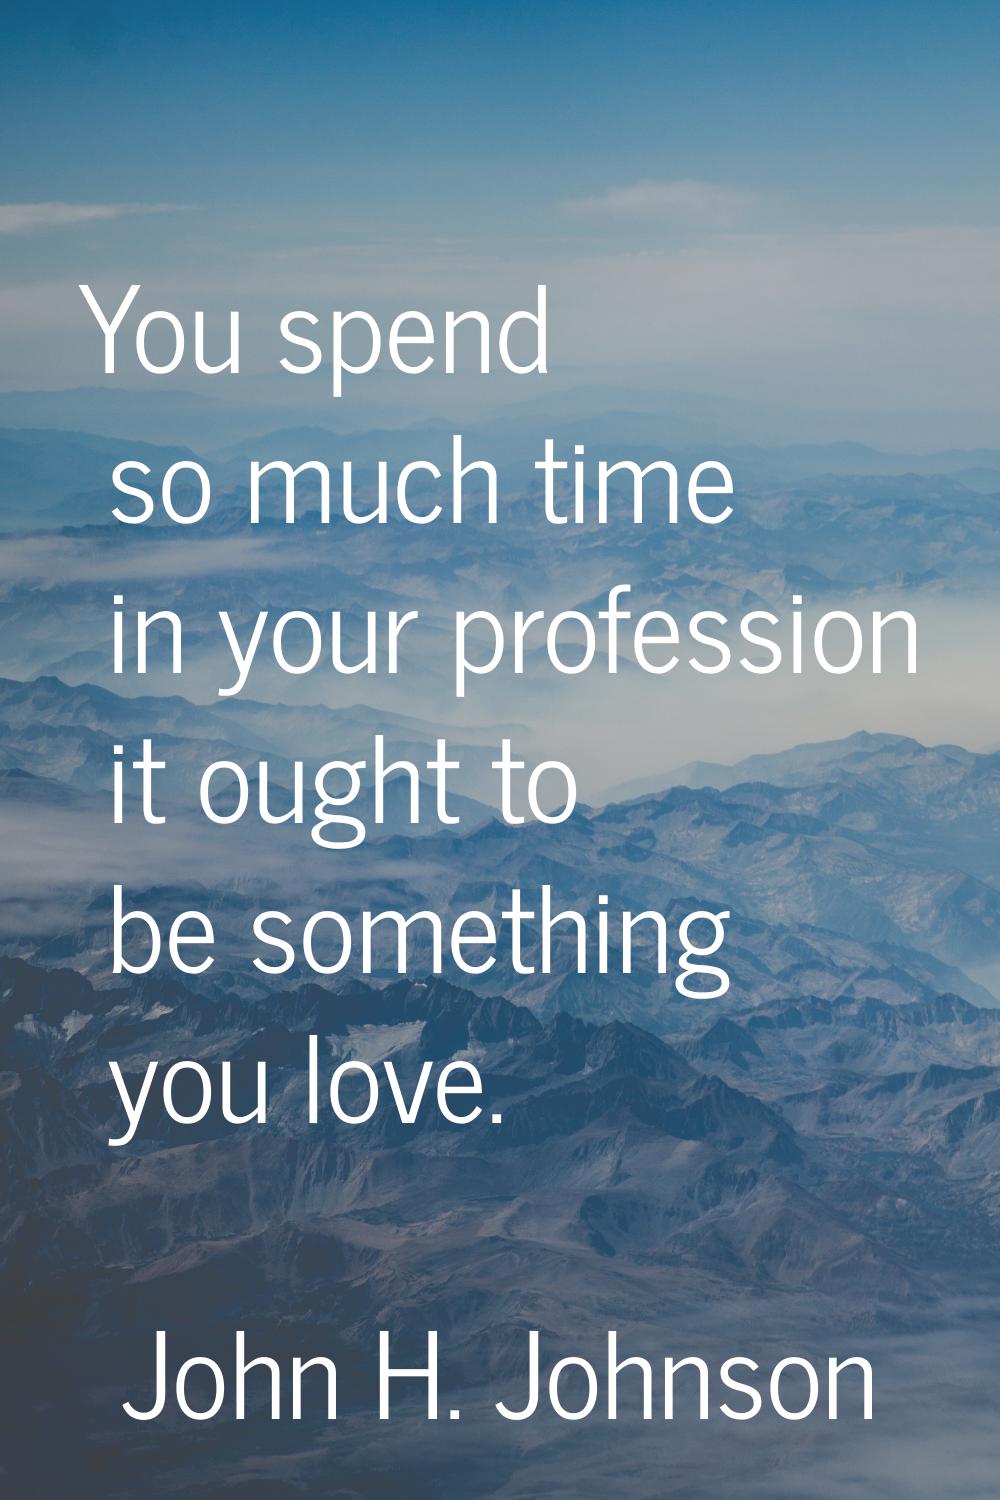 You spend so much time in your profession it ought to be something you love.